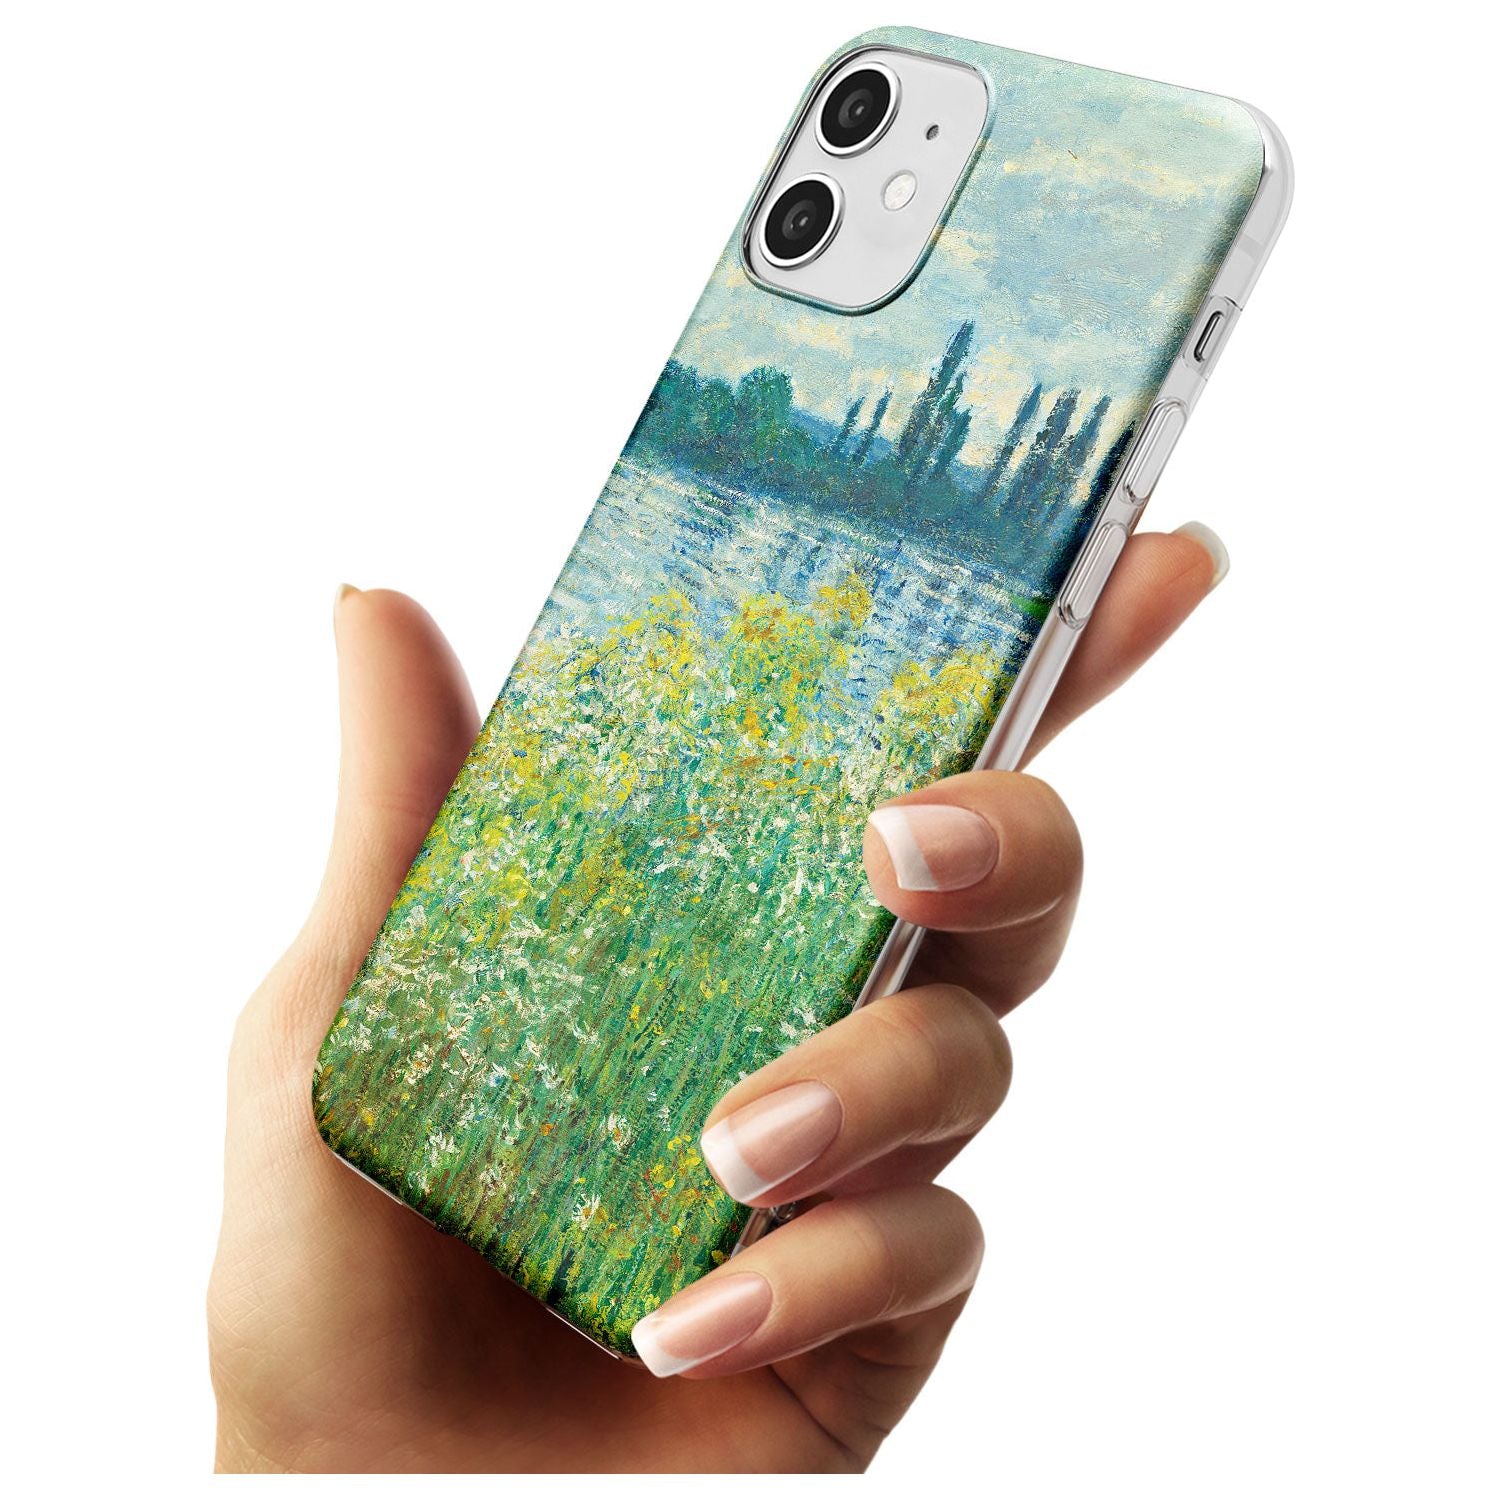 Banks of the Seine by Claude Monet Black Impact Phone Case for iPhone 11